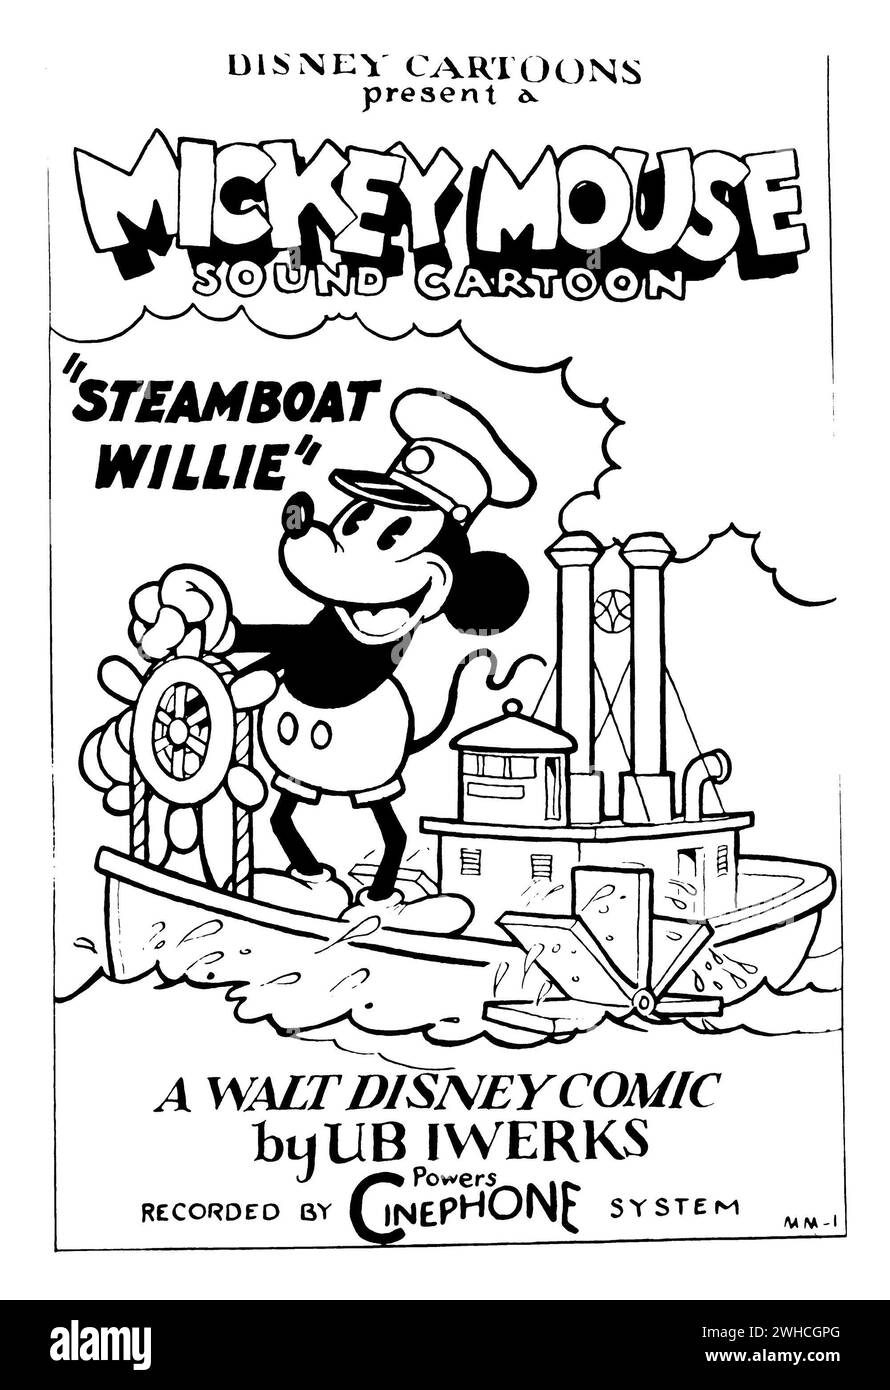 Steamboat Willie. Original Poster to the 1928 Cartoon, Steamboat Willie - Mickey Mouse's first animated short. Stock Photo